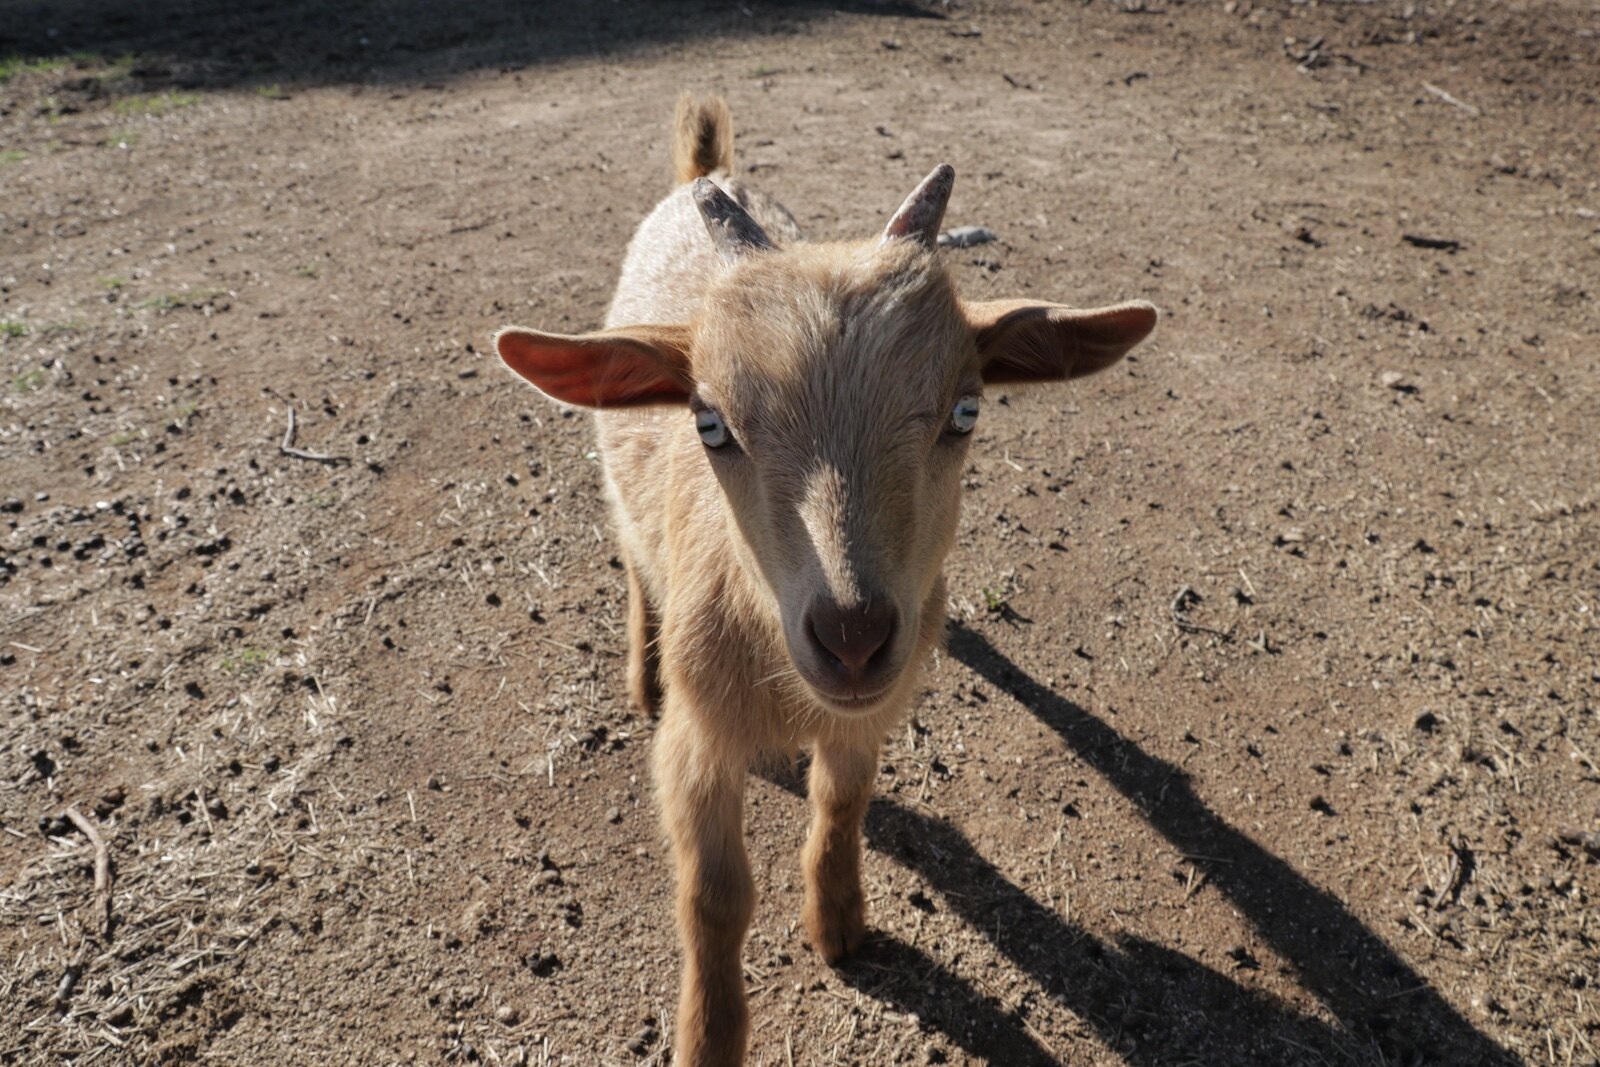 Goat at Jester King farm